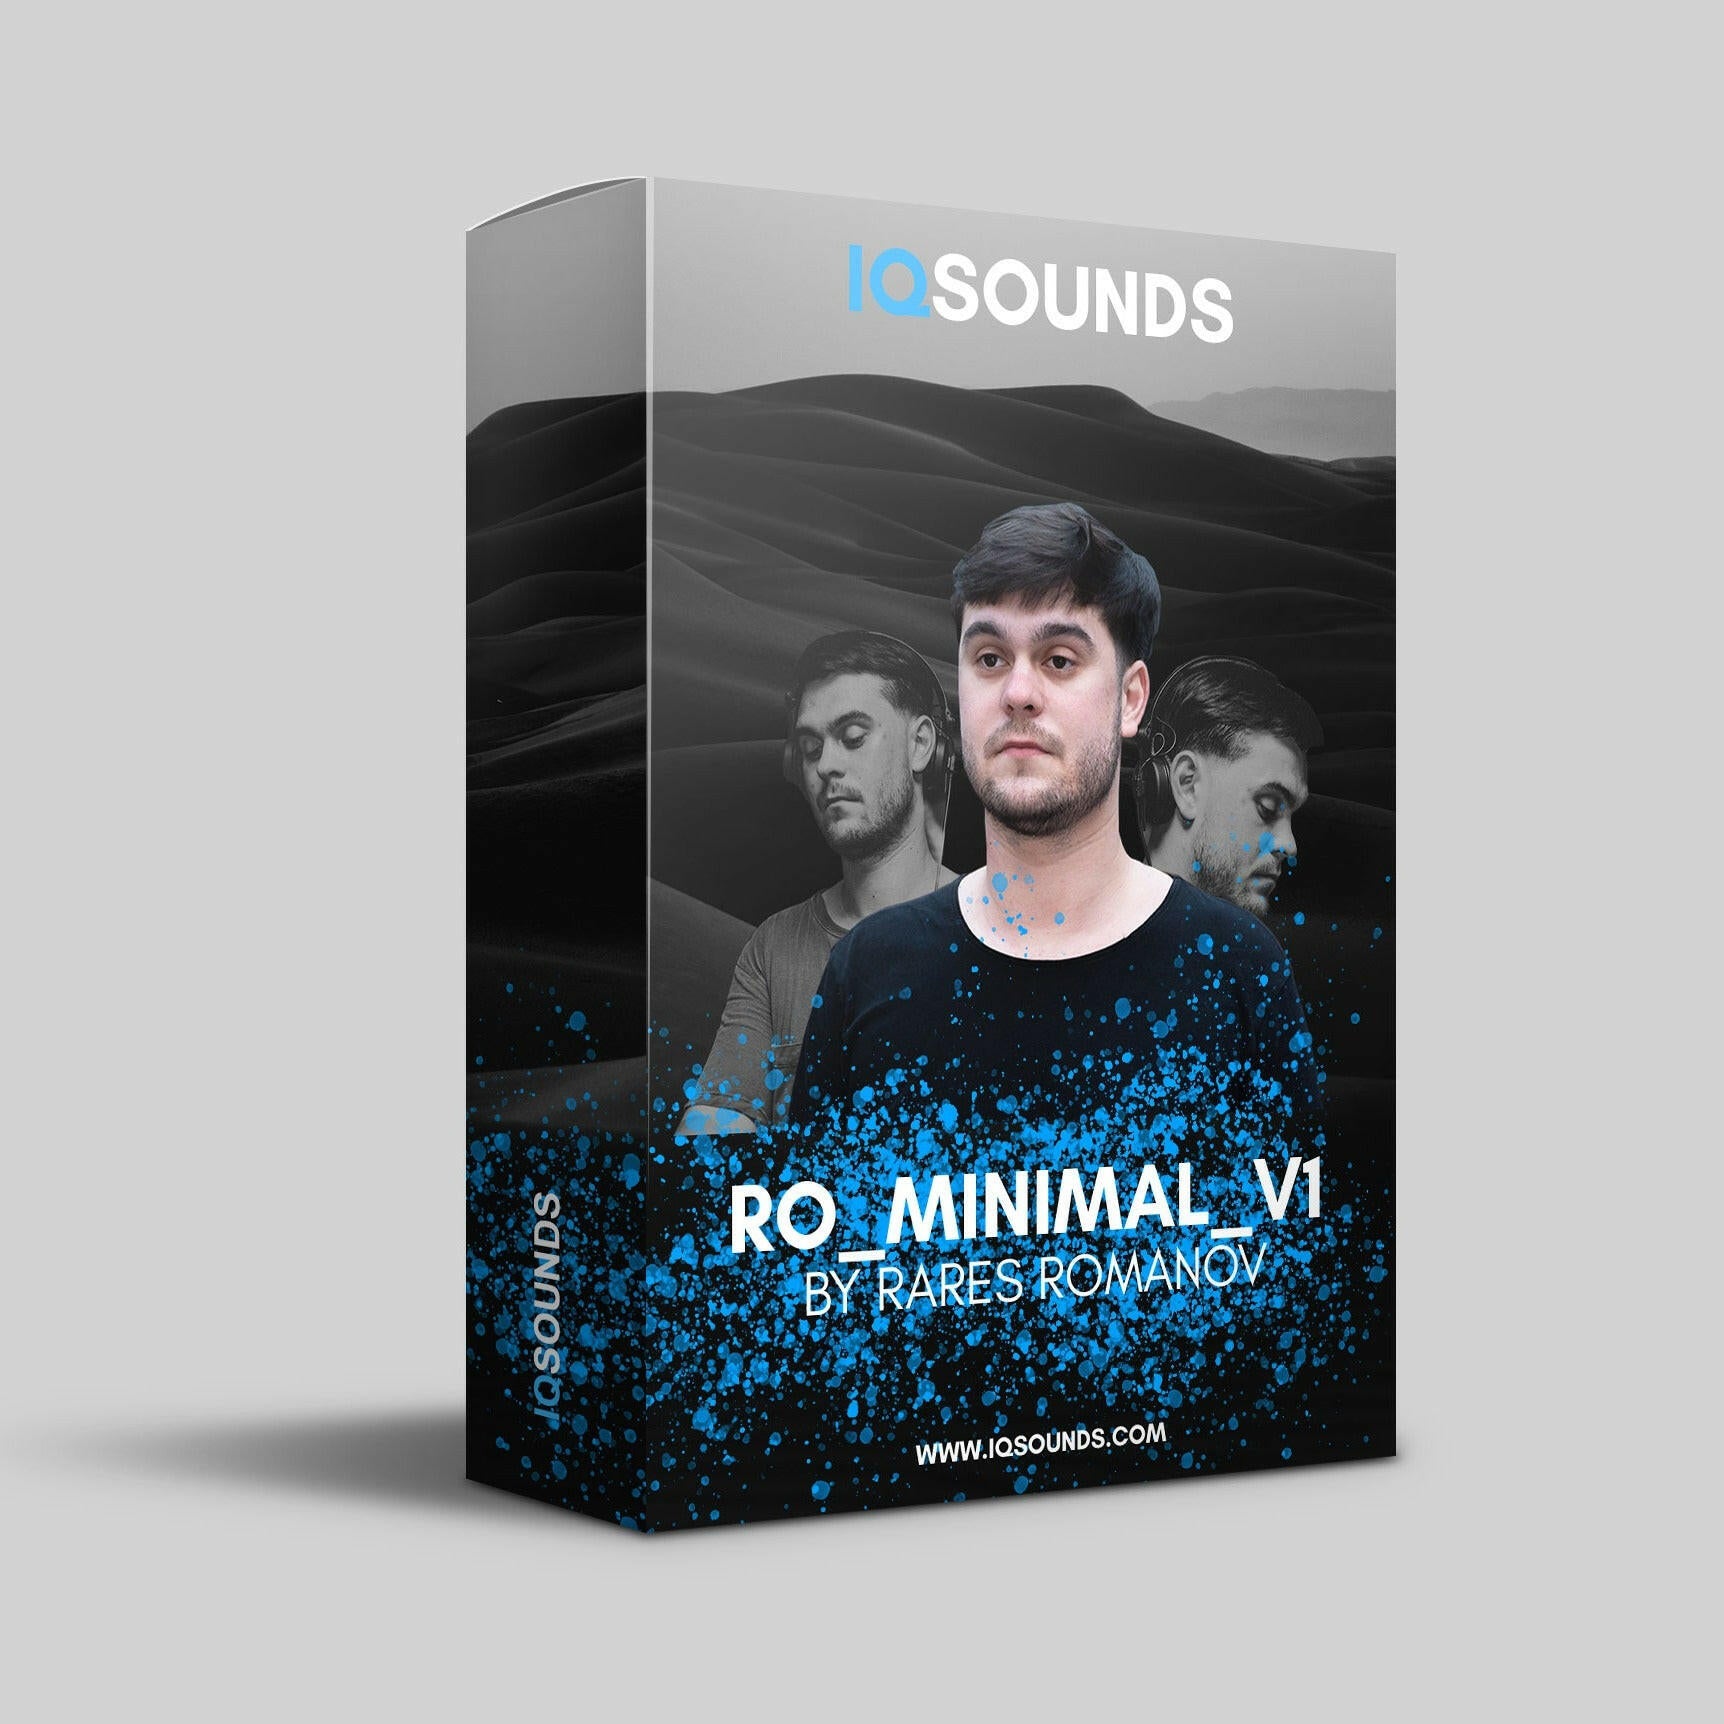 rominimal, rominimal samples, rominimal sample pack, romanian minimal samples, romanian minimal sounds, romanian minimal loops, rominimal sample pack, iqsounds